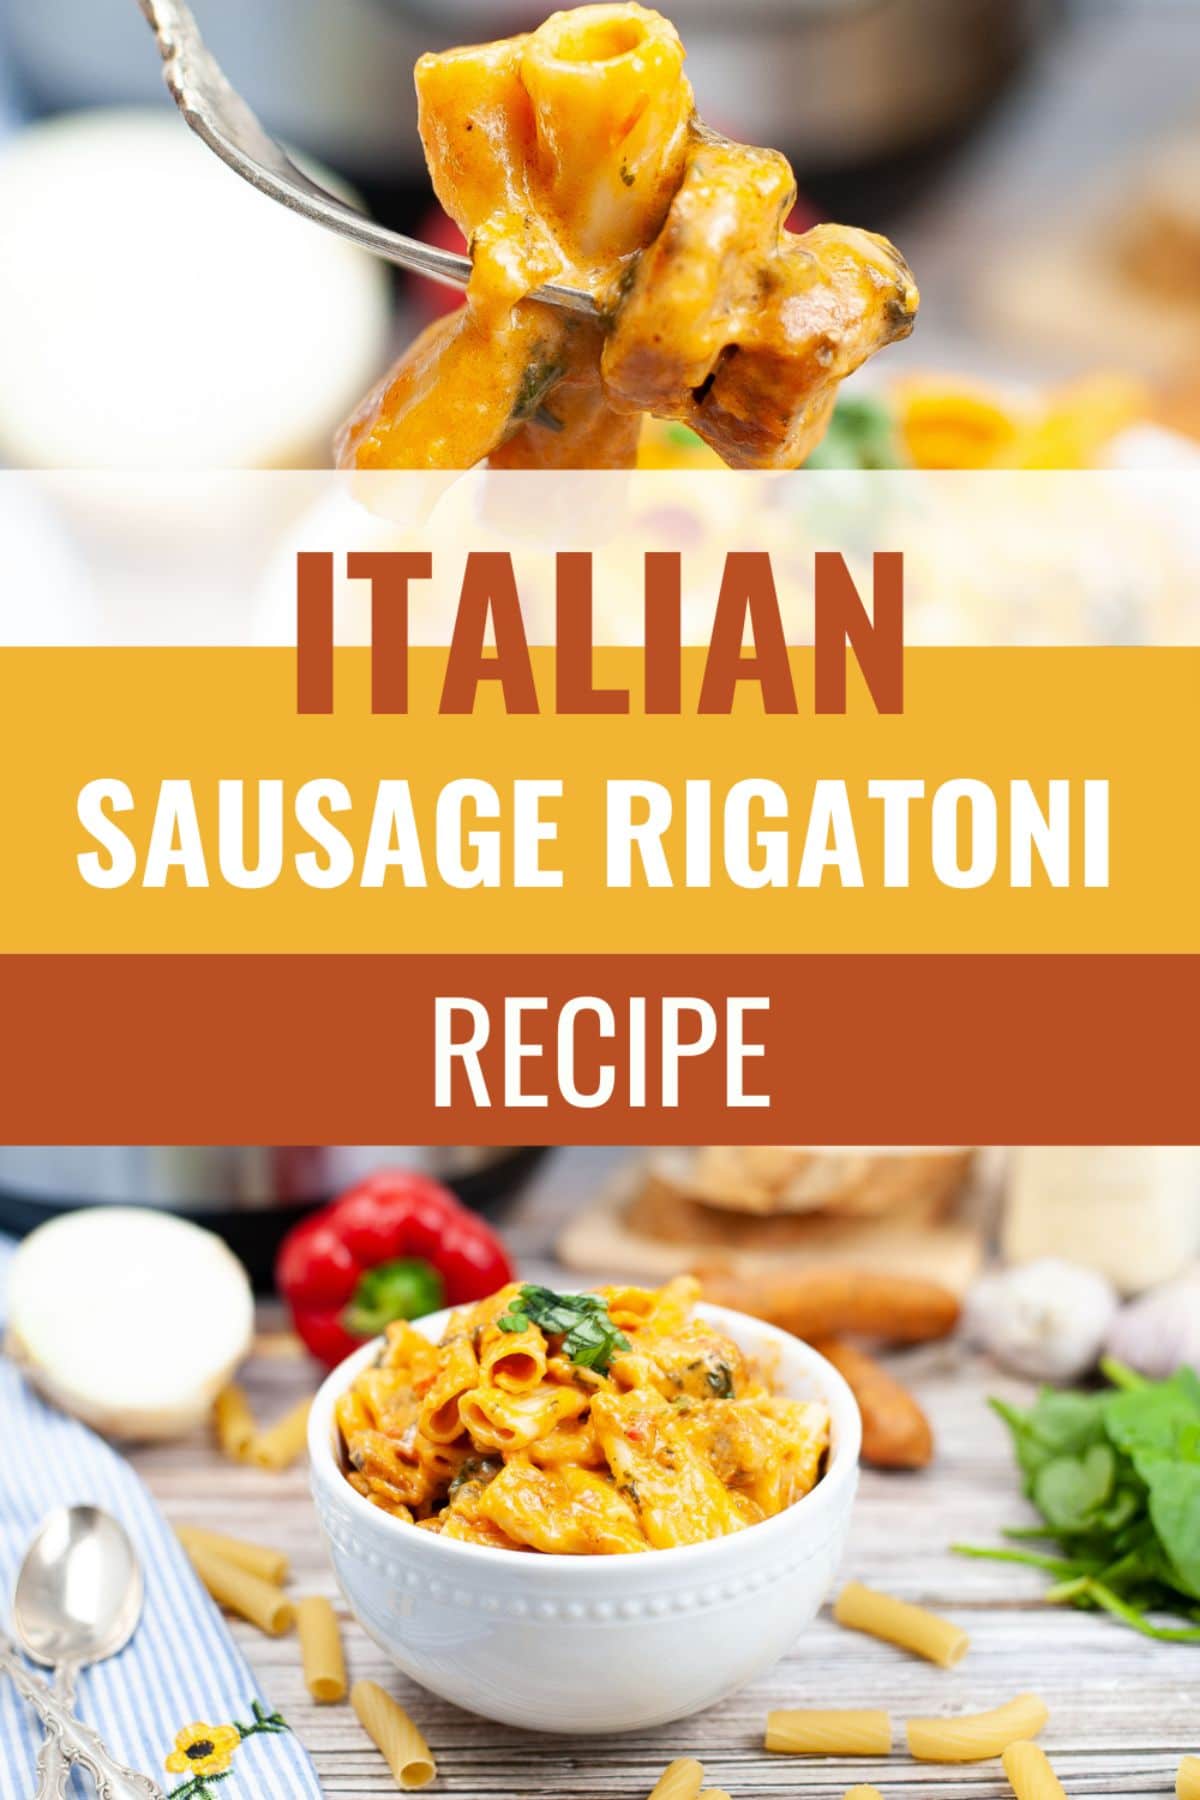 Instant Pot Italian Sausage Rigatoni is an easy, flavorful meal for any night of the week. Even the pickiest eaters are going to love it. #instantpot #pressurecooker #instantpotrigatoni #rigatoni #italiansausage via @wondermomwannab